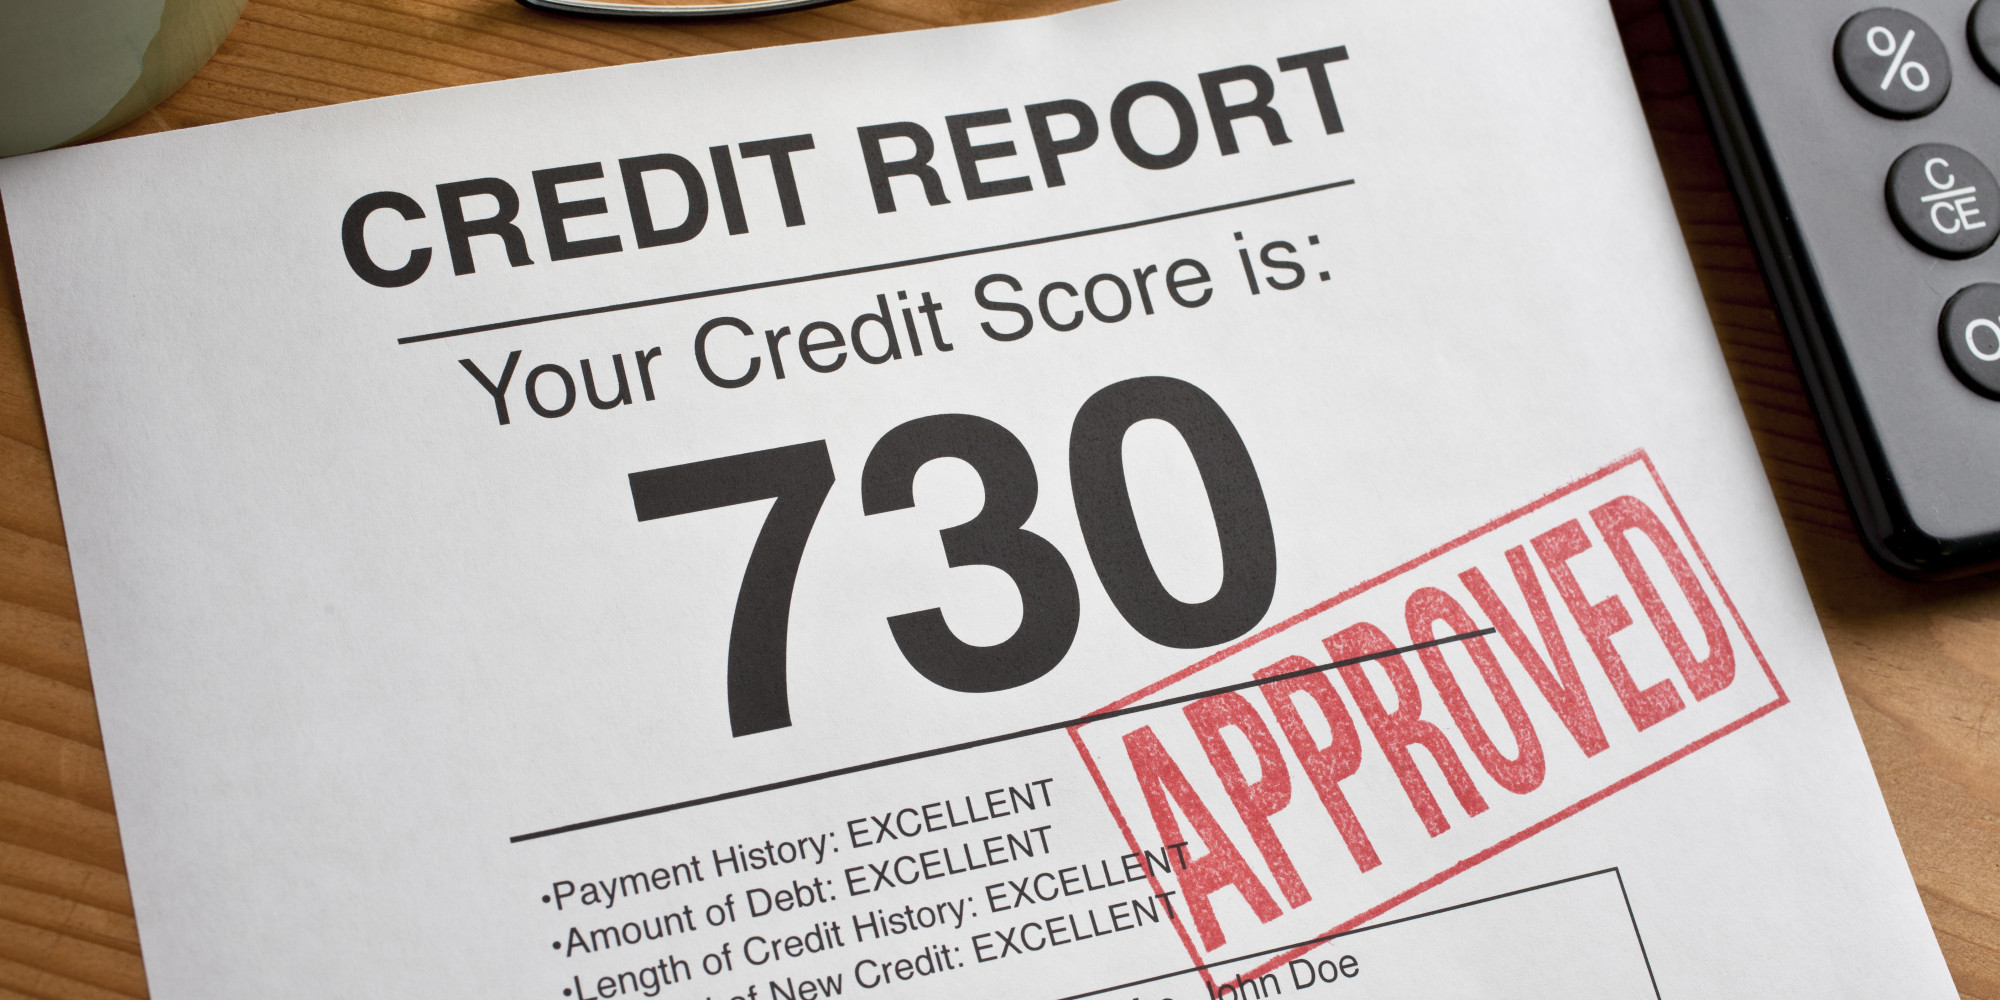 Learn How to Ask for a Higher Credit Limit